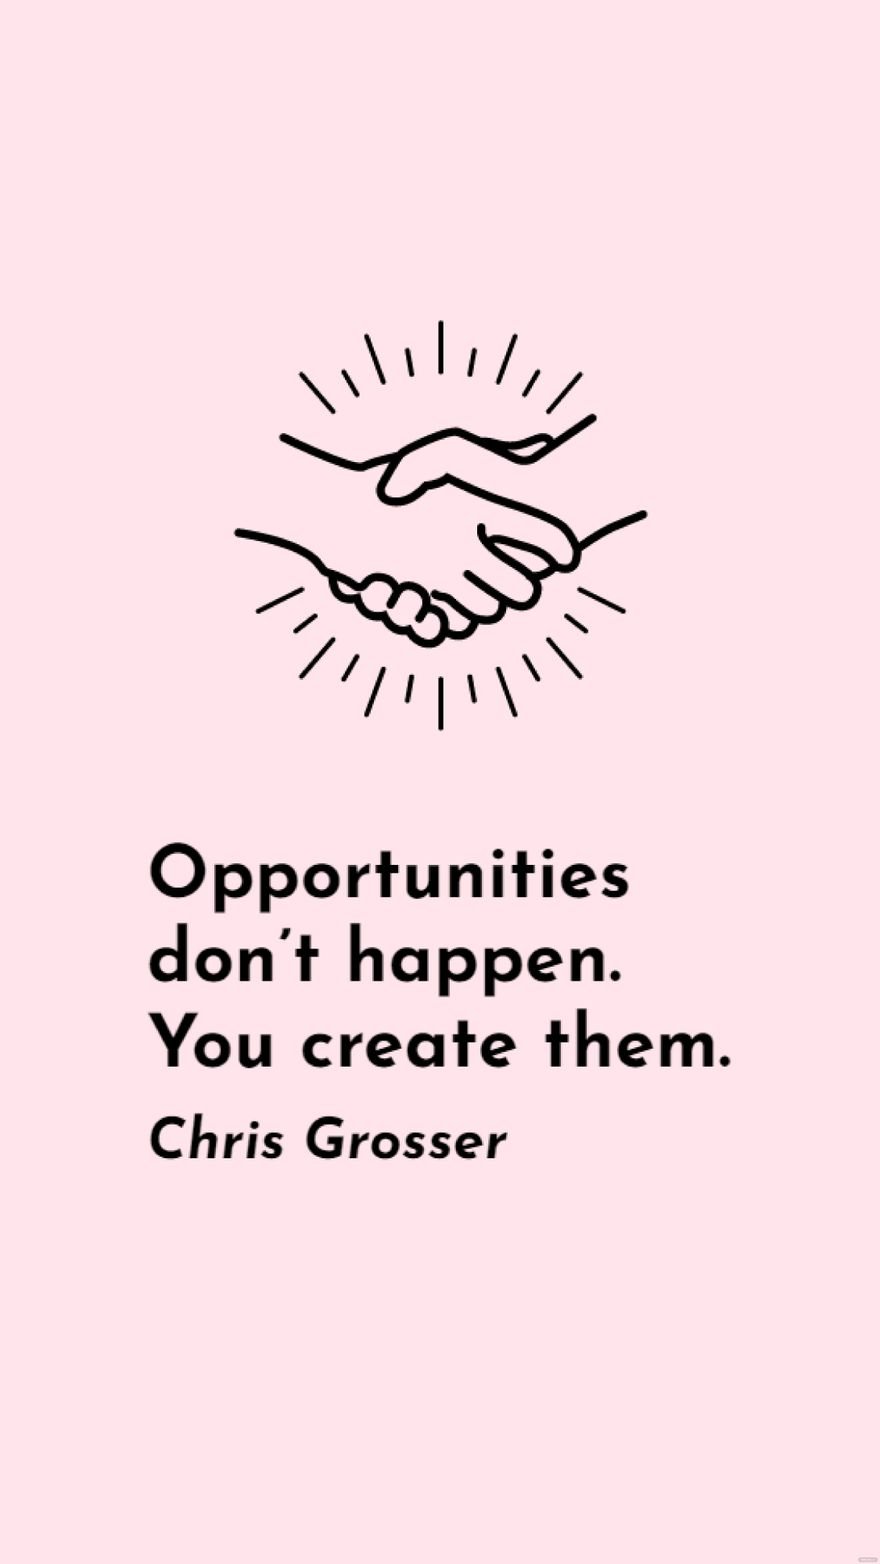 Free Chris Grosser - Opportunities don’t happen. You create them.